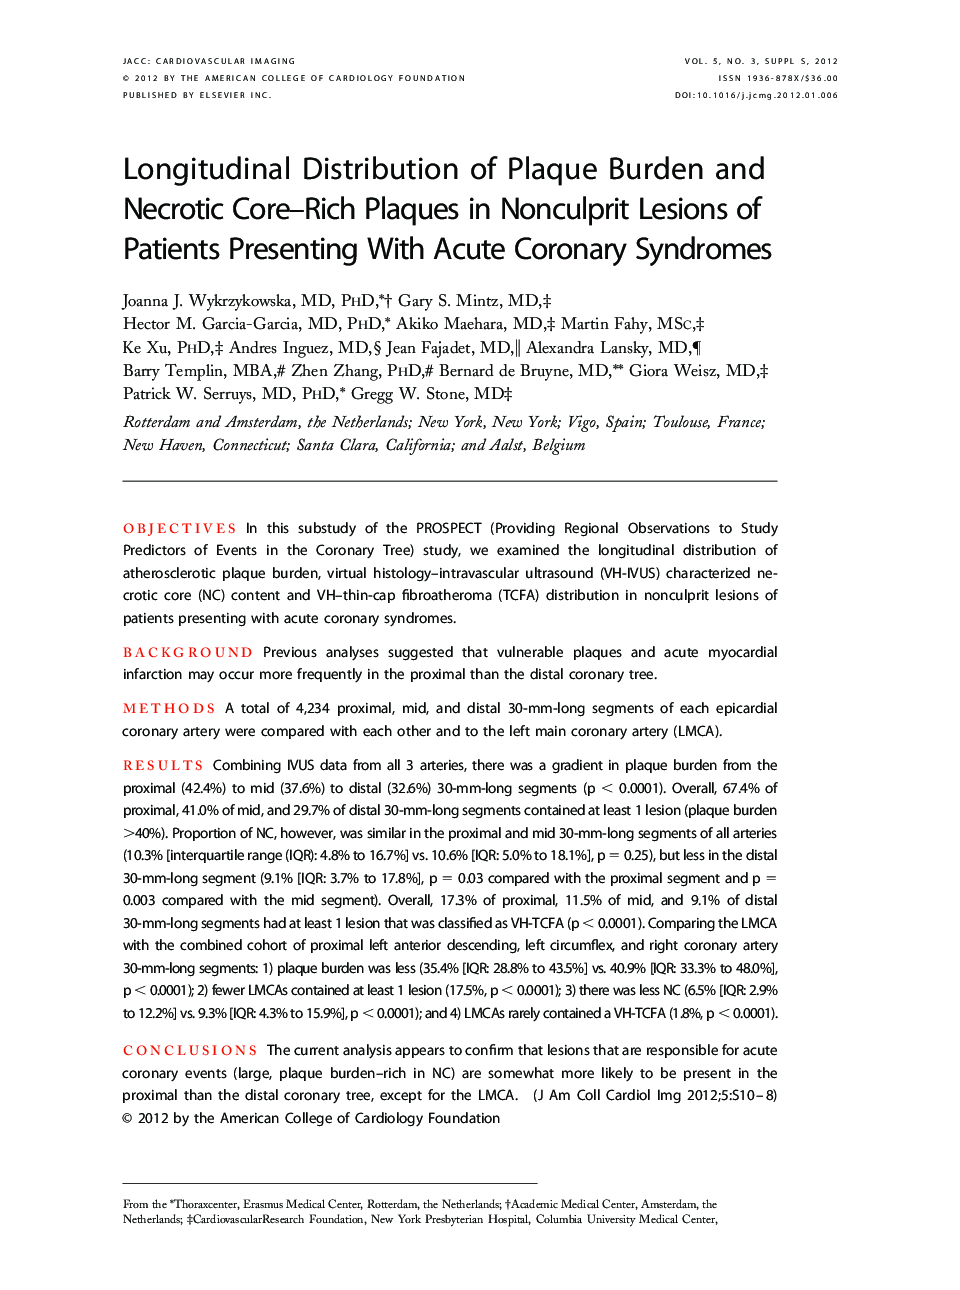 Longitudinal Distribution of Plaque Burden and Necrotic Core–Rich Plaques in Nonculprit Lesions of Patients Presenting With Acute Coronary Syndromes 